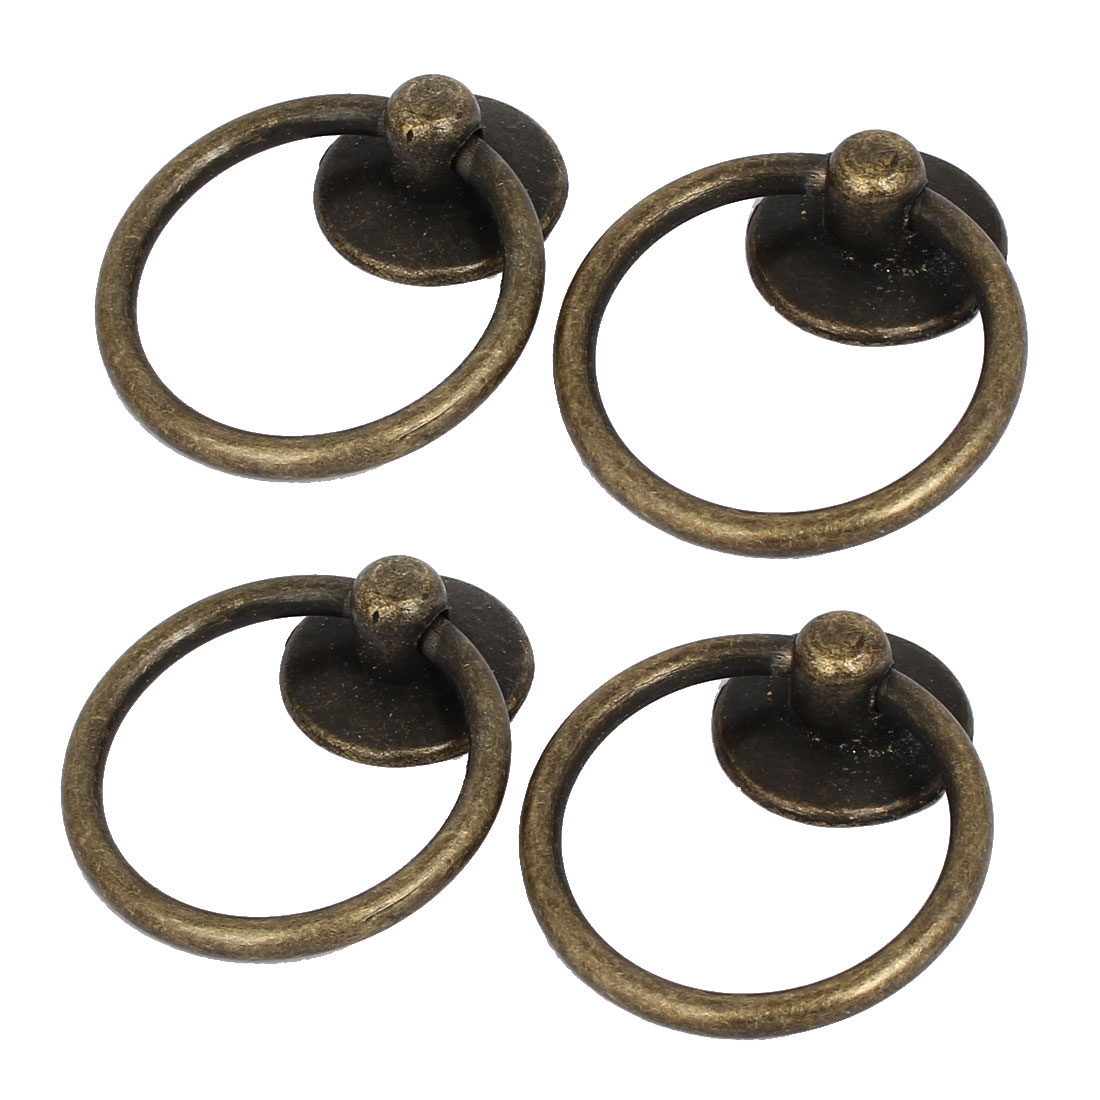 Uxcell Furniture Drawer Door Retro Style Ring Pull Handles Bronze Tone 52x43x13mm 8pcs - image 5 of 7